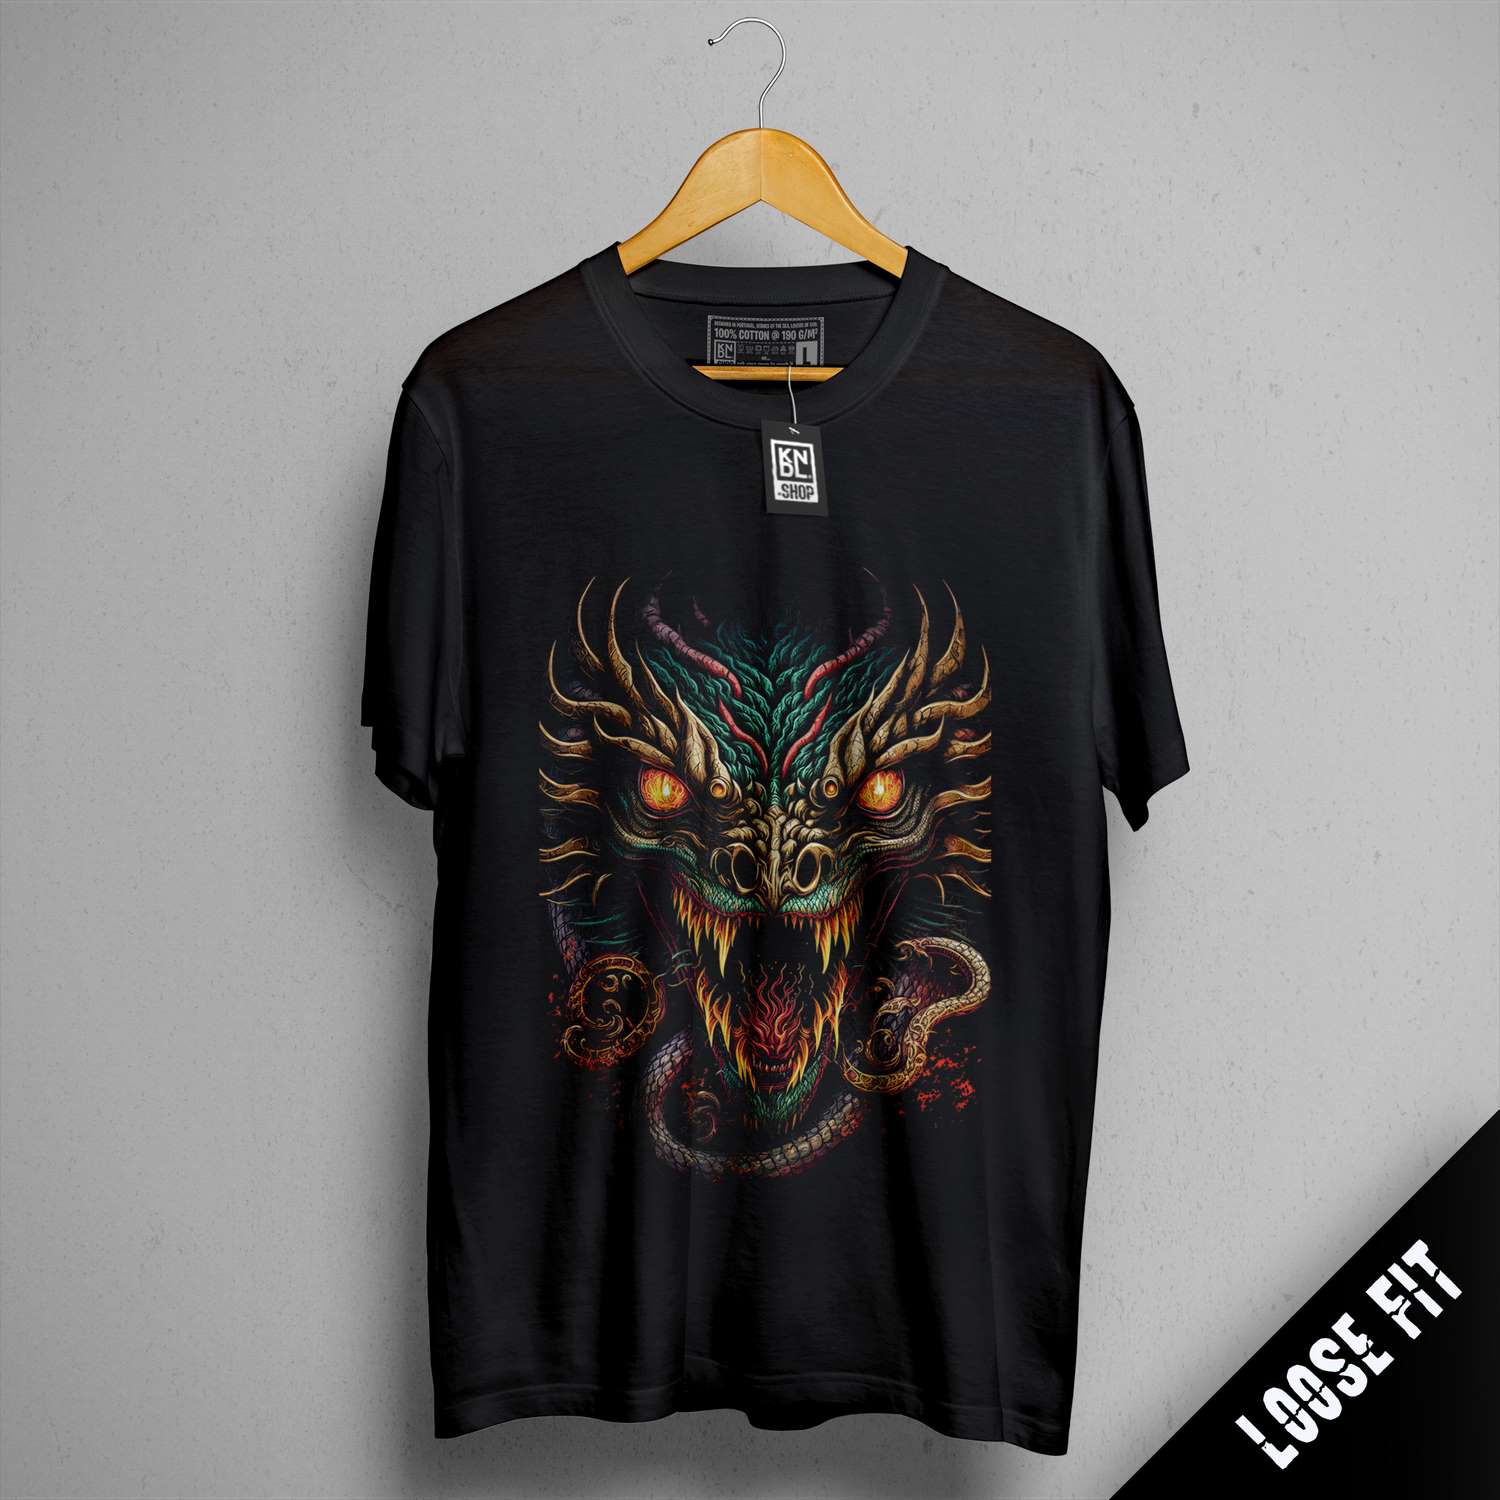 a black t - shirt with a dragon on it